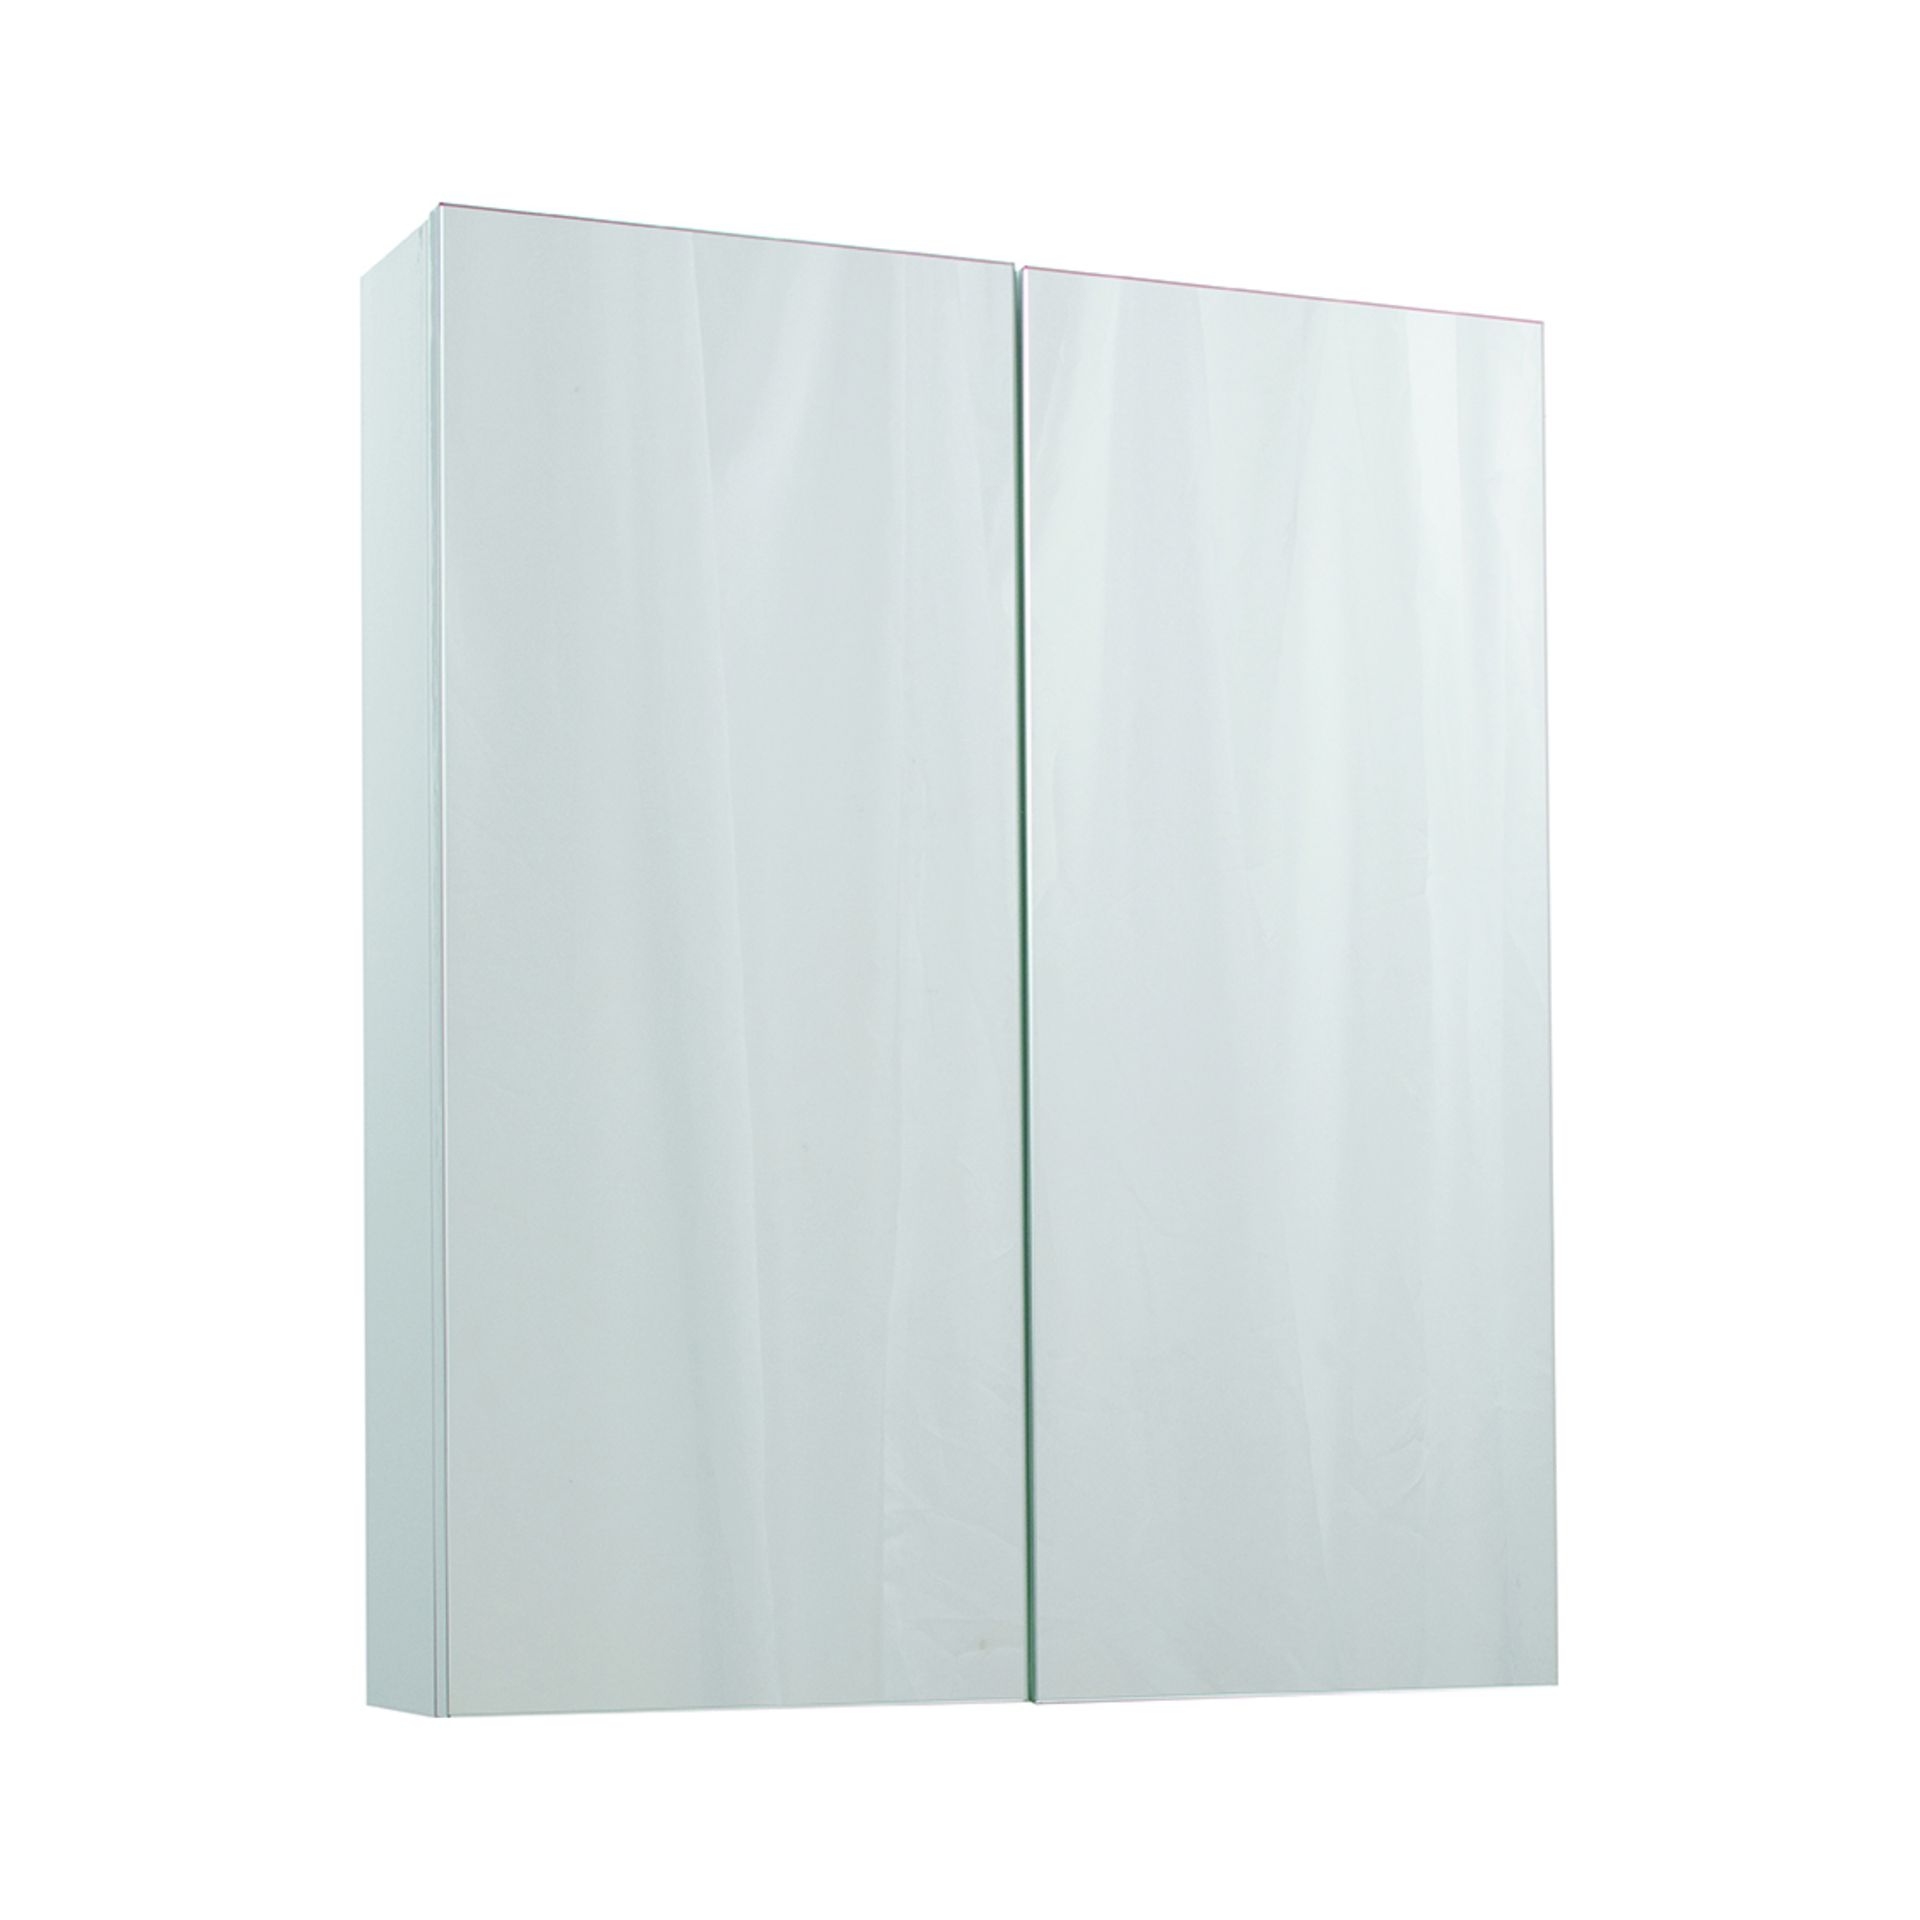 New (T140) Belle And Fresco Gloss White 600mm 2 Door Mirror Cabinet. RRP £277.55. - Image 2 of 2